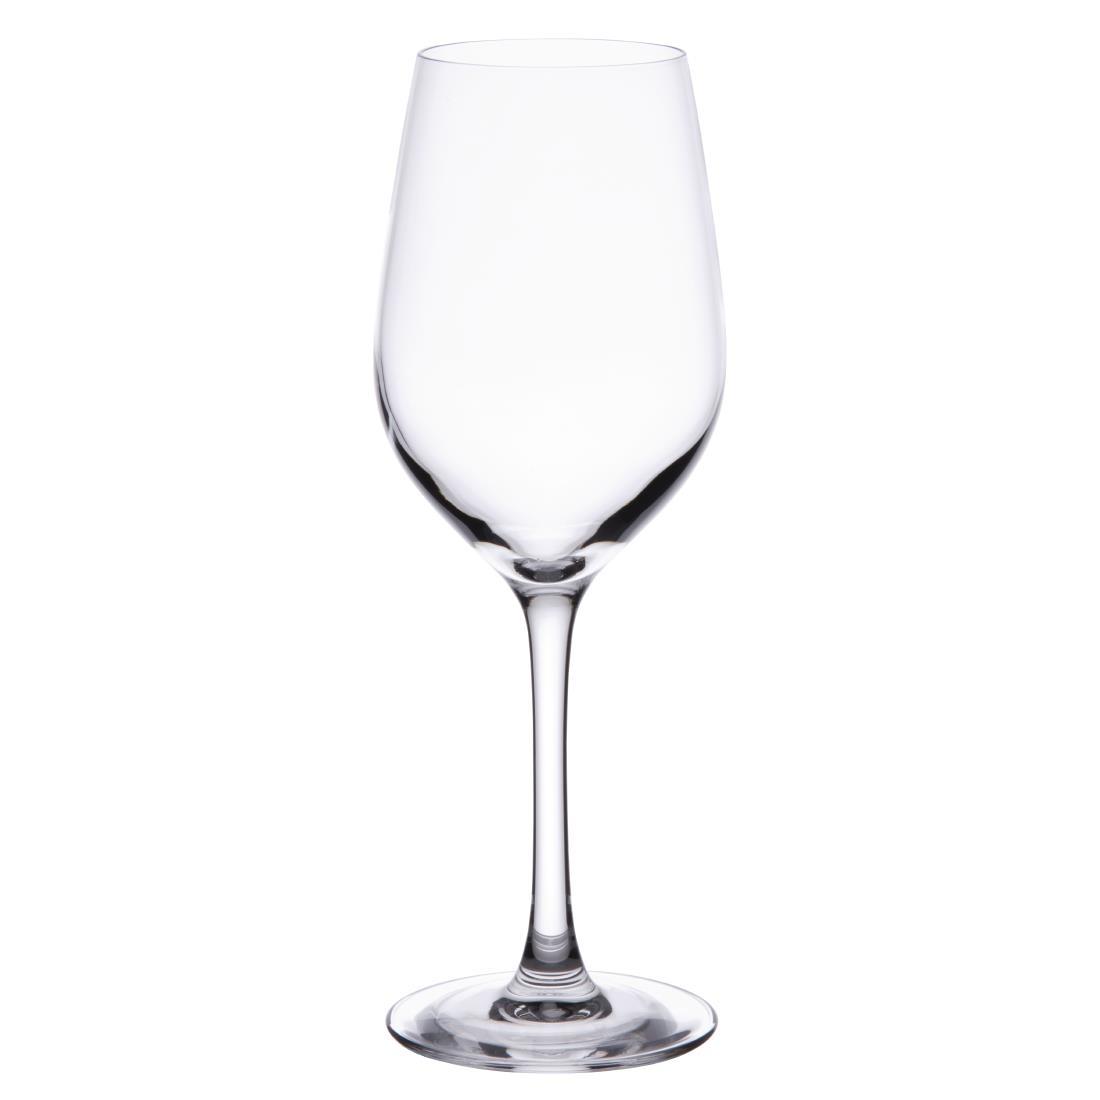 Arcoroc Mineral Wine Glasses 350ml (Pack of 24) - GD965  - 1